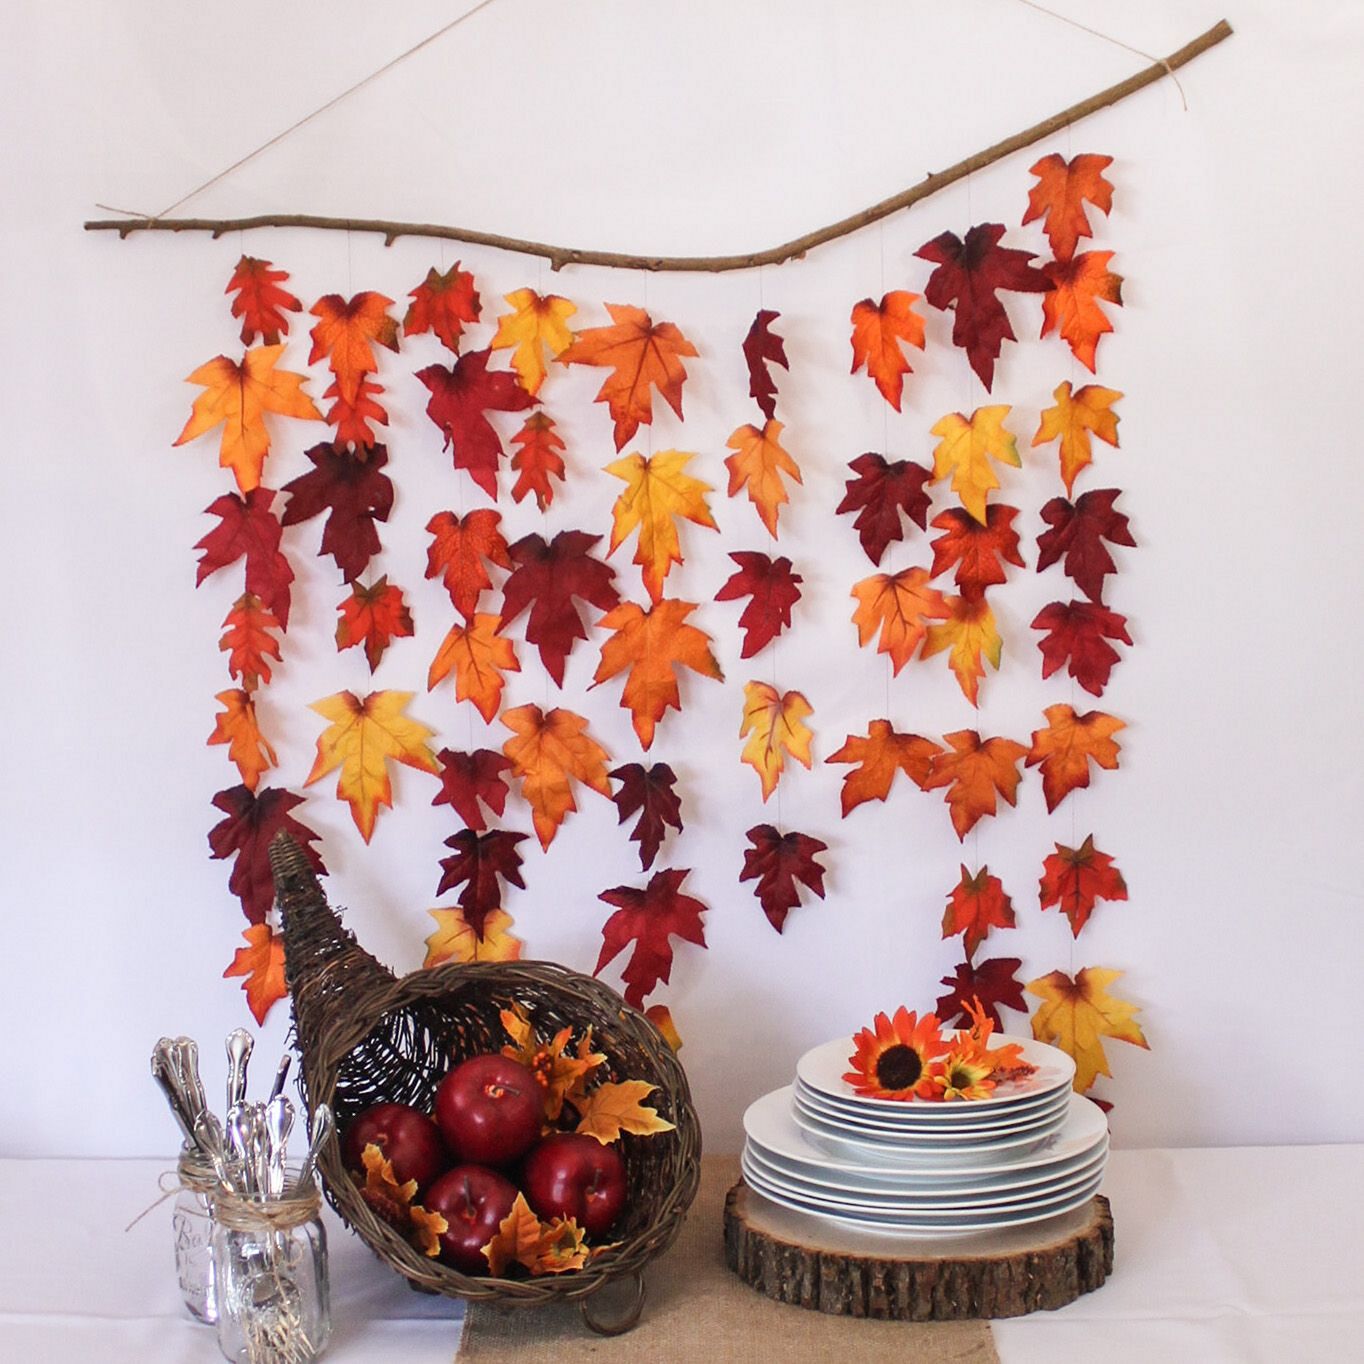 DIY Garland Of Autumn Leaves From E Ipar